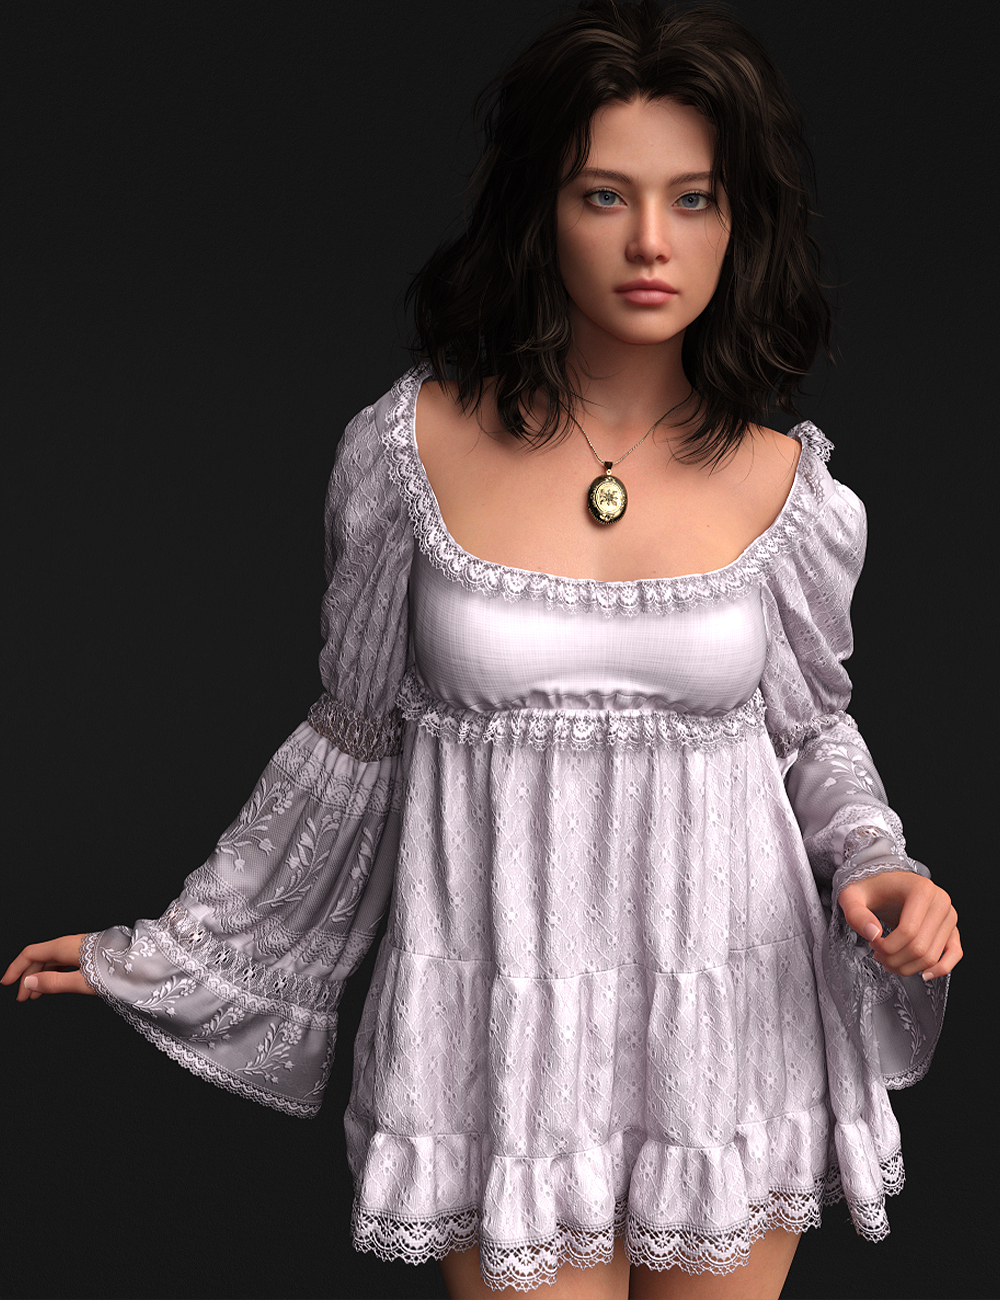 Diverse Add-on for the dForce Romantic Short Dress by: antjeadarling97, 3D Models by Daz 3D